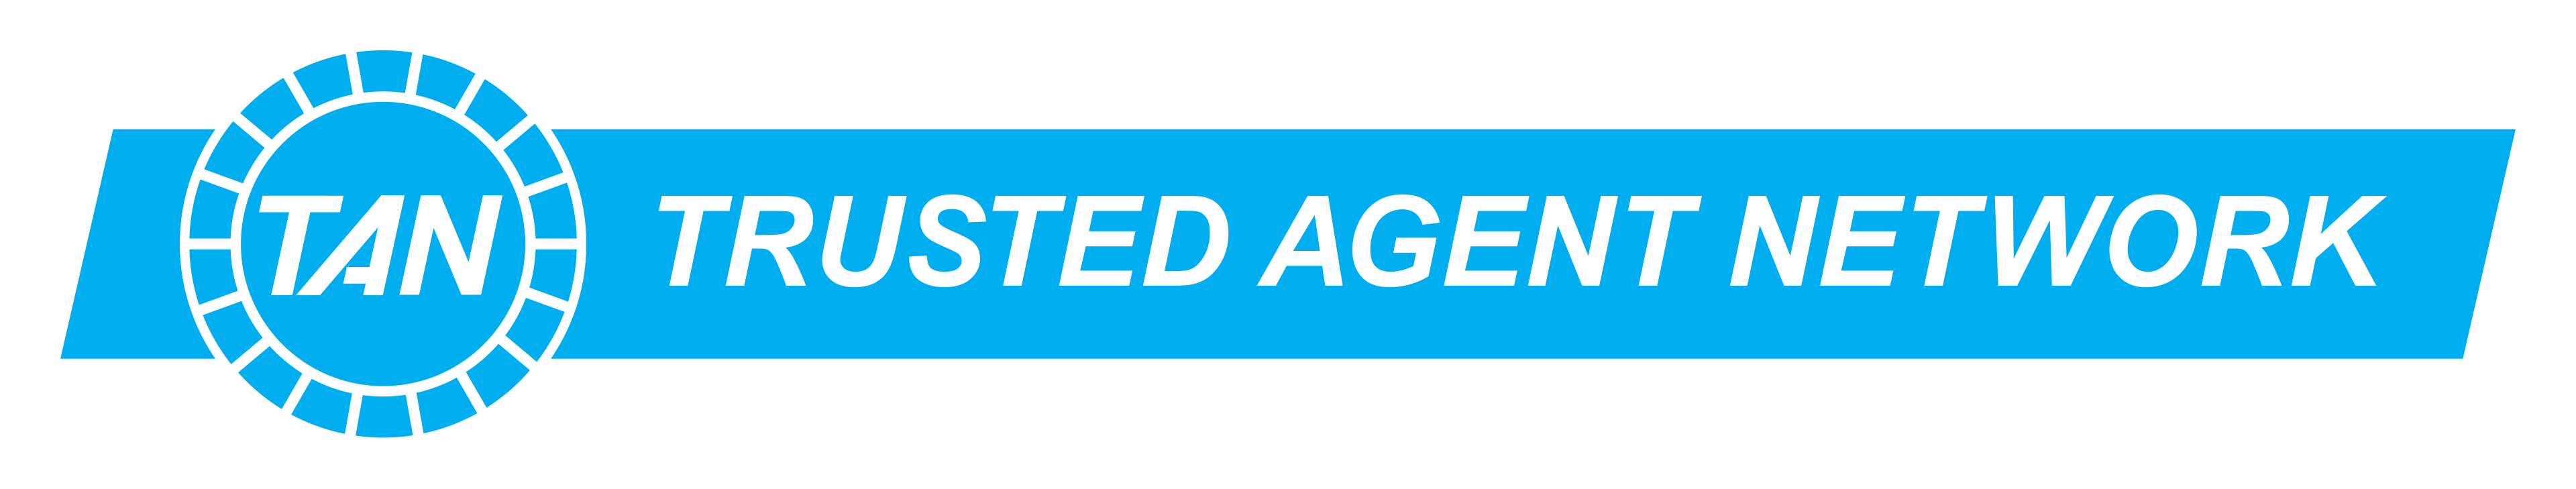 Trusted Agent Network Logo